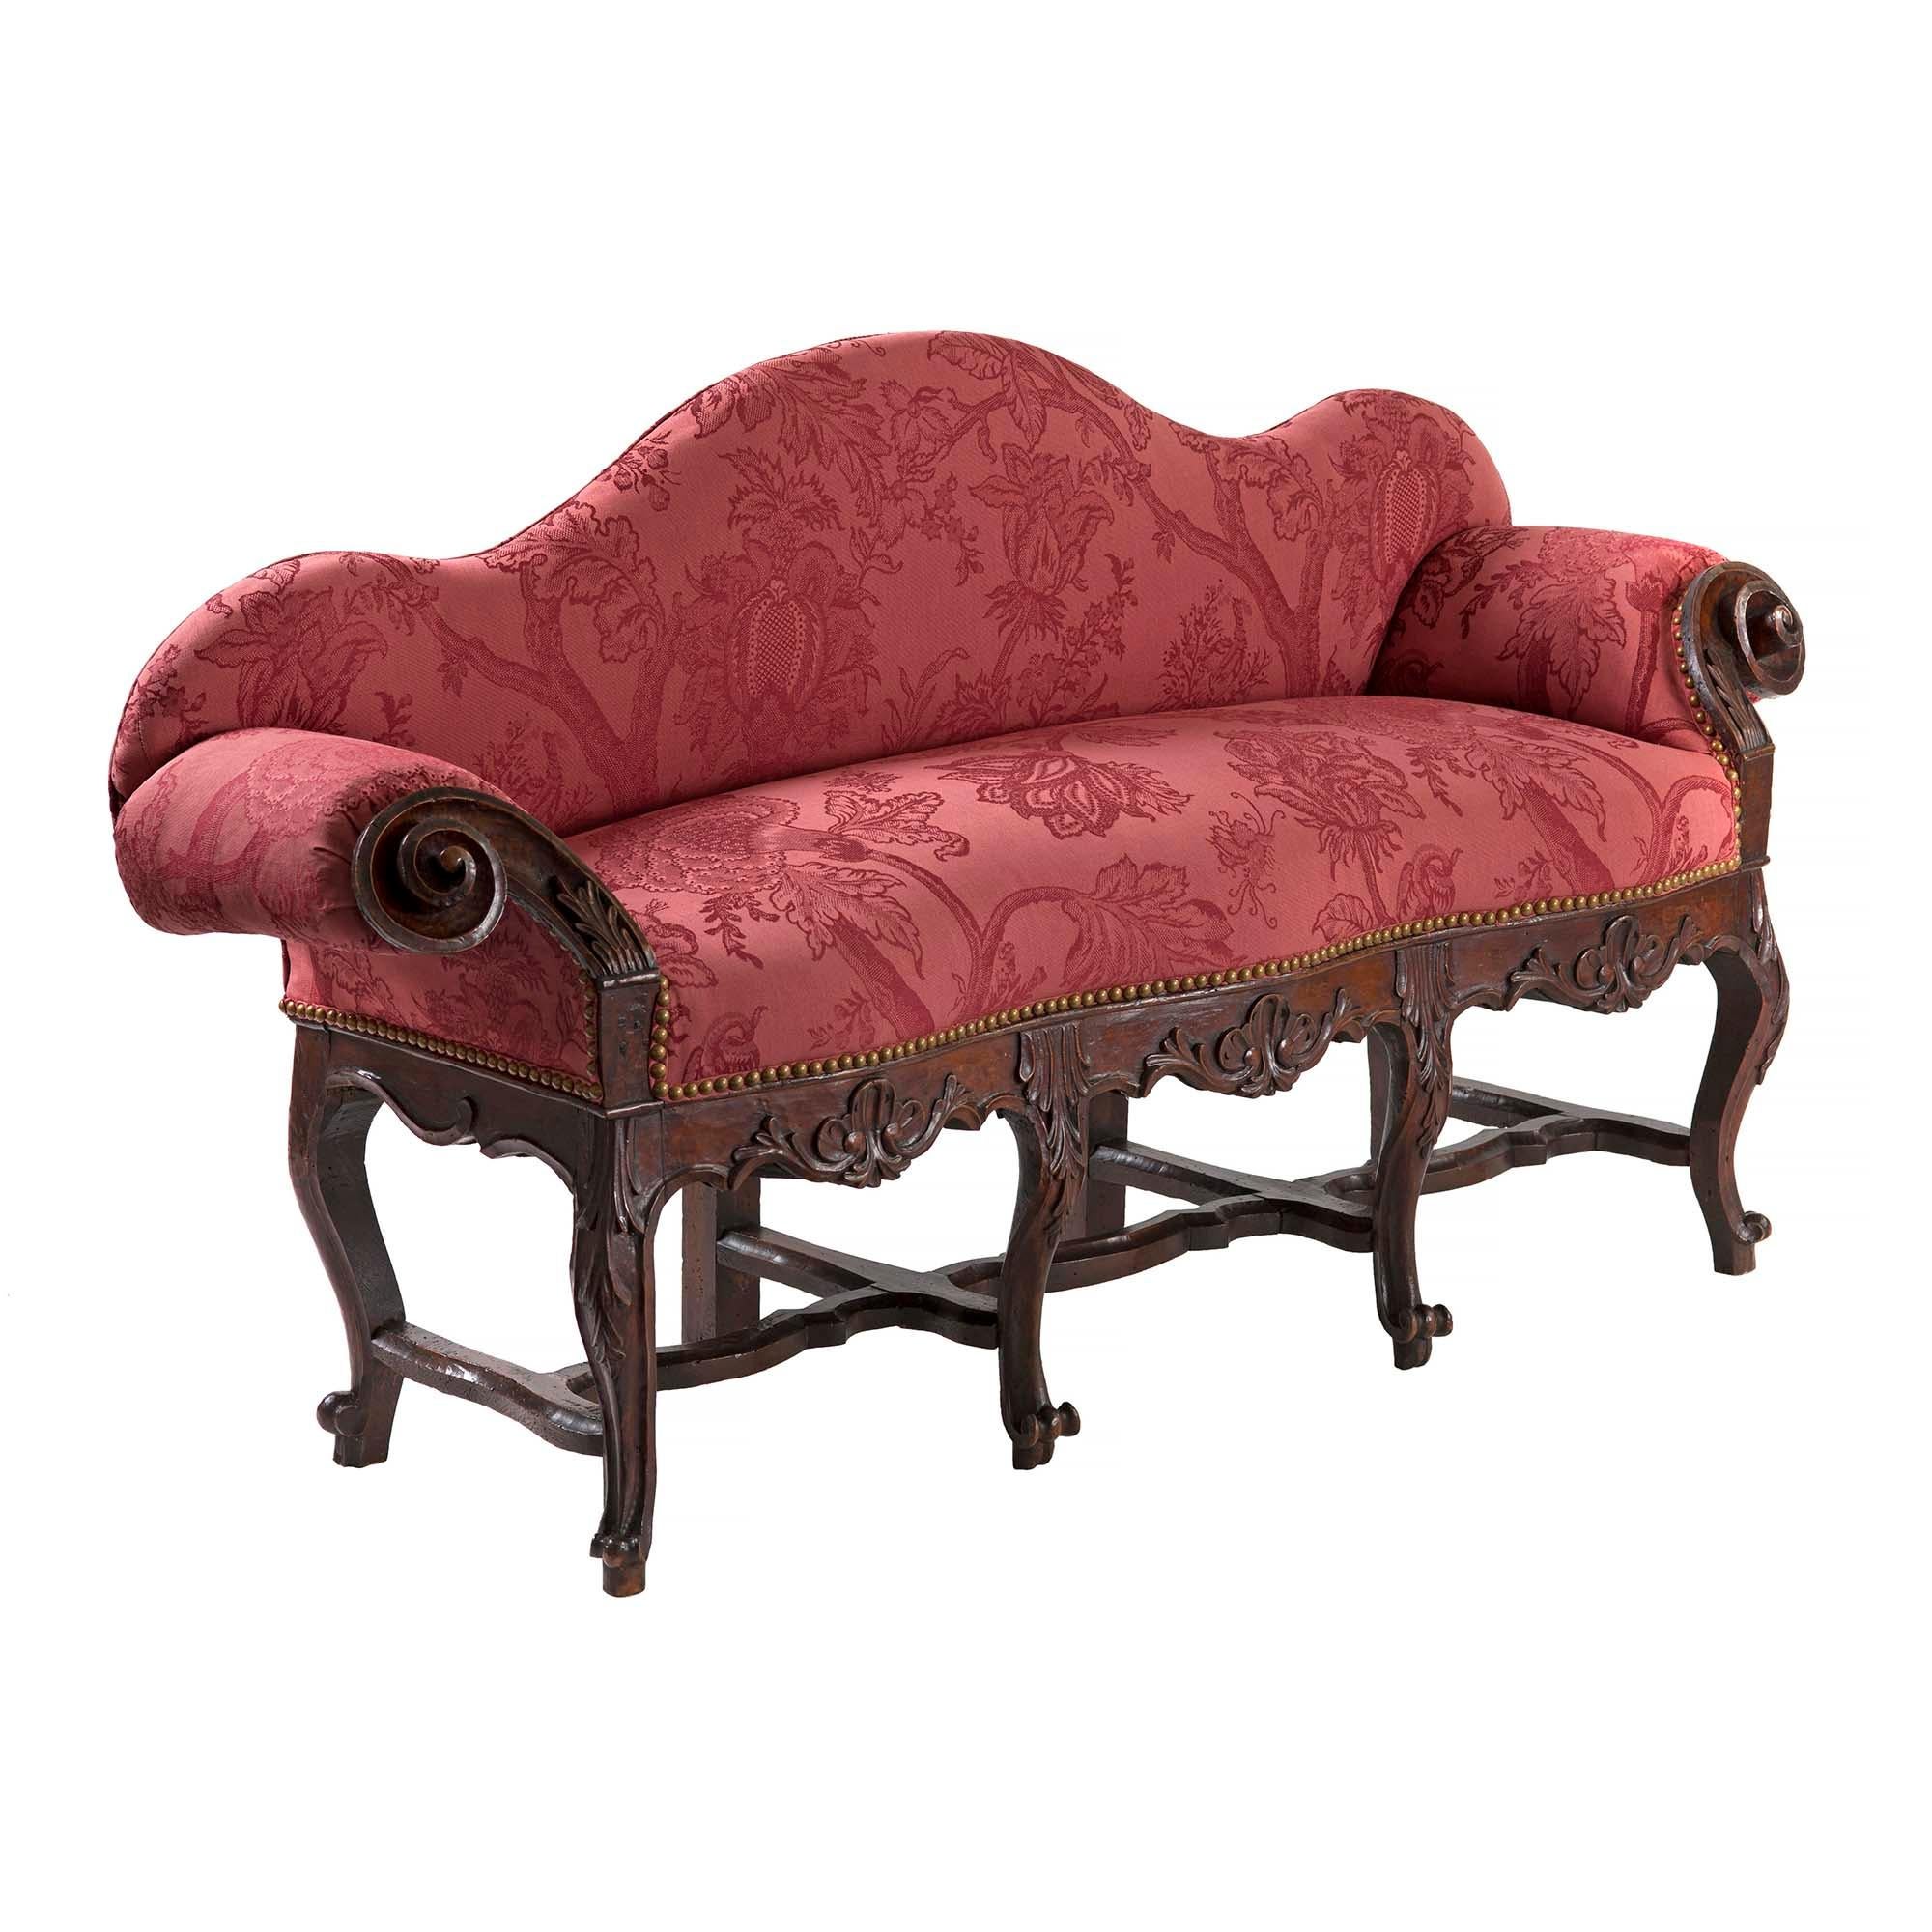 A charming small scale French 18th century Louis XV period walnut child's settee. The settee is raised by eight cabriole legs with fine scrolled feet and attached by a most decorative stretcher. Each leg displays richly carved acanthus leaves and